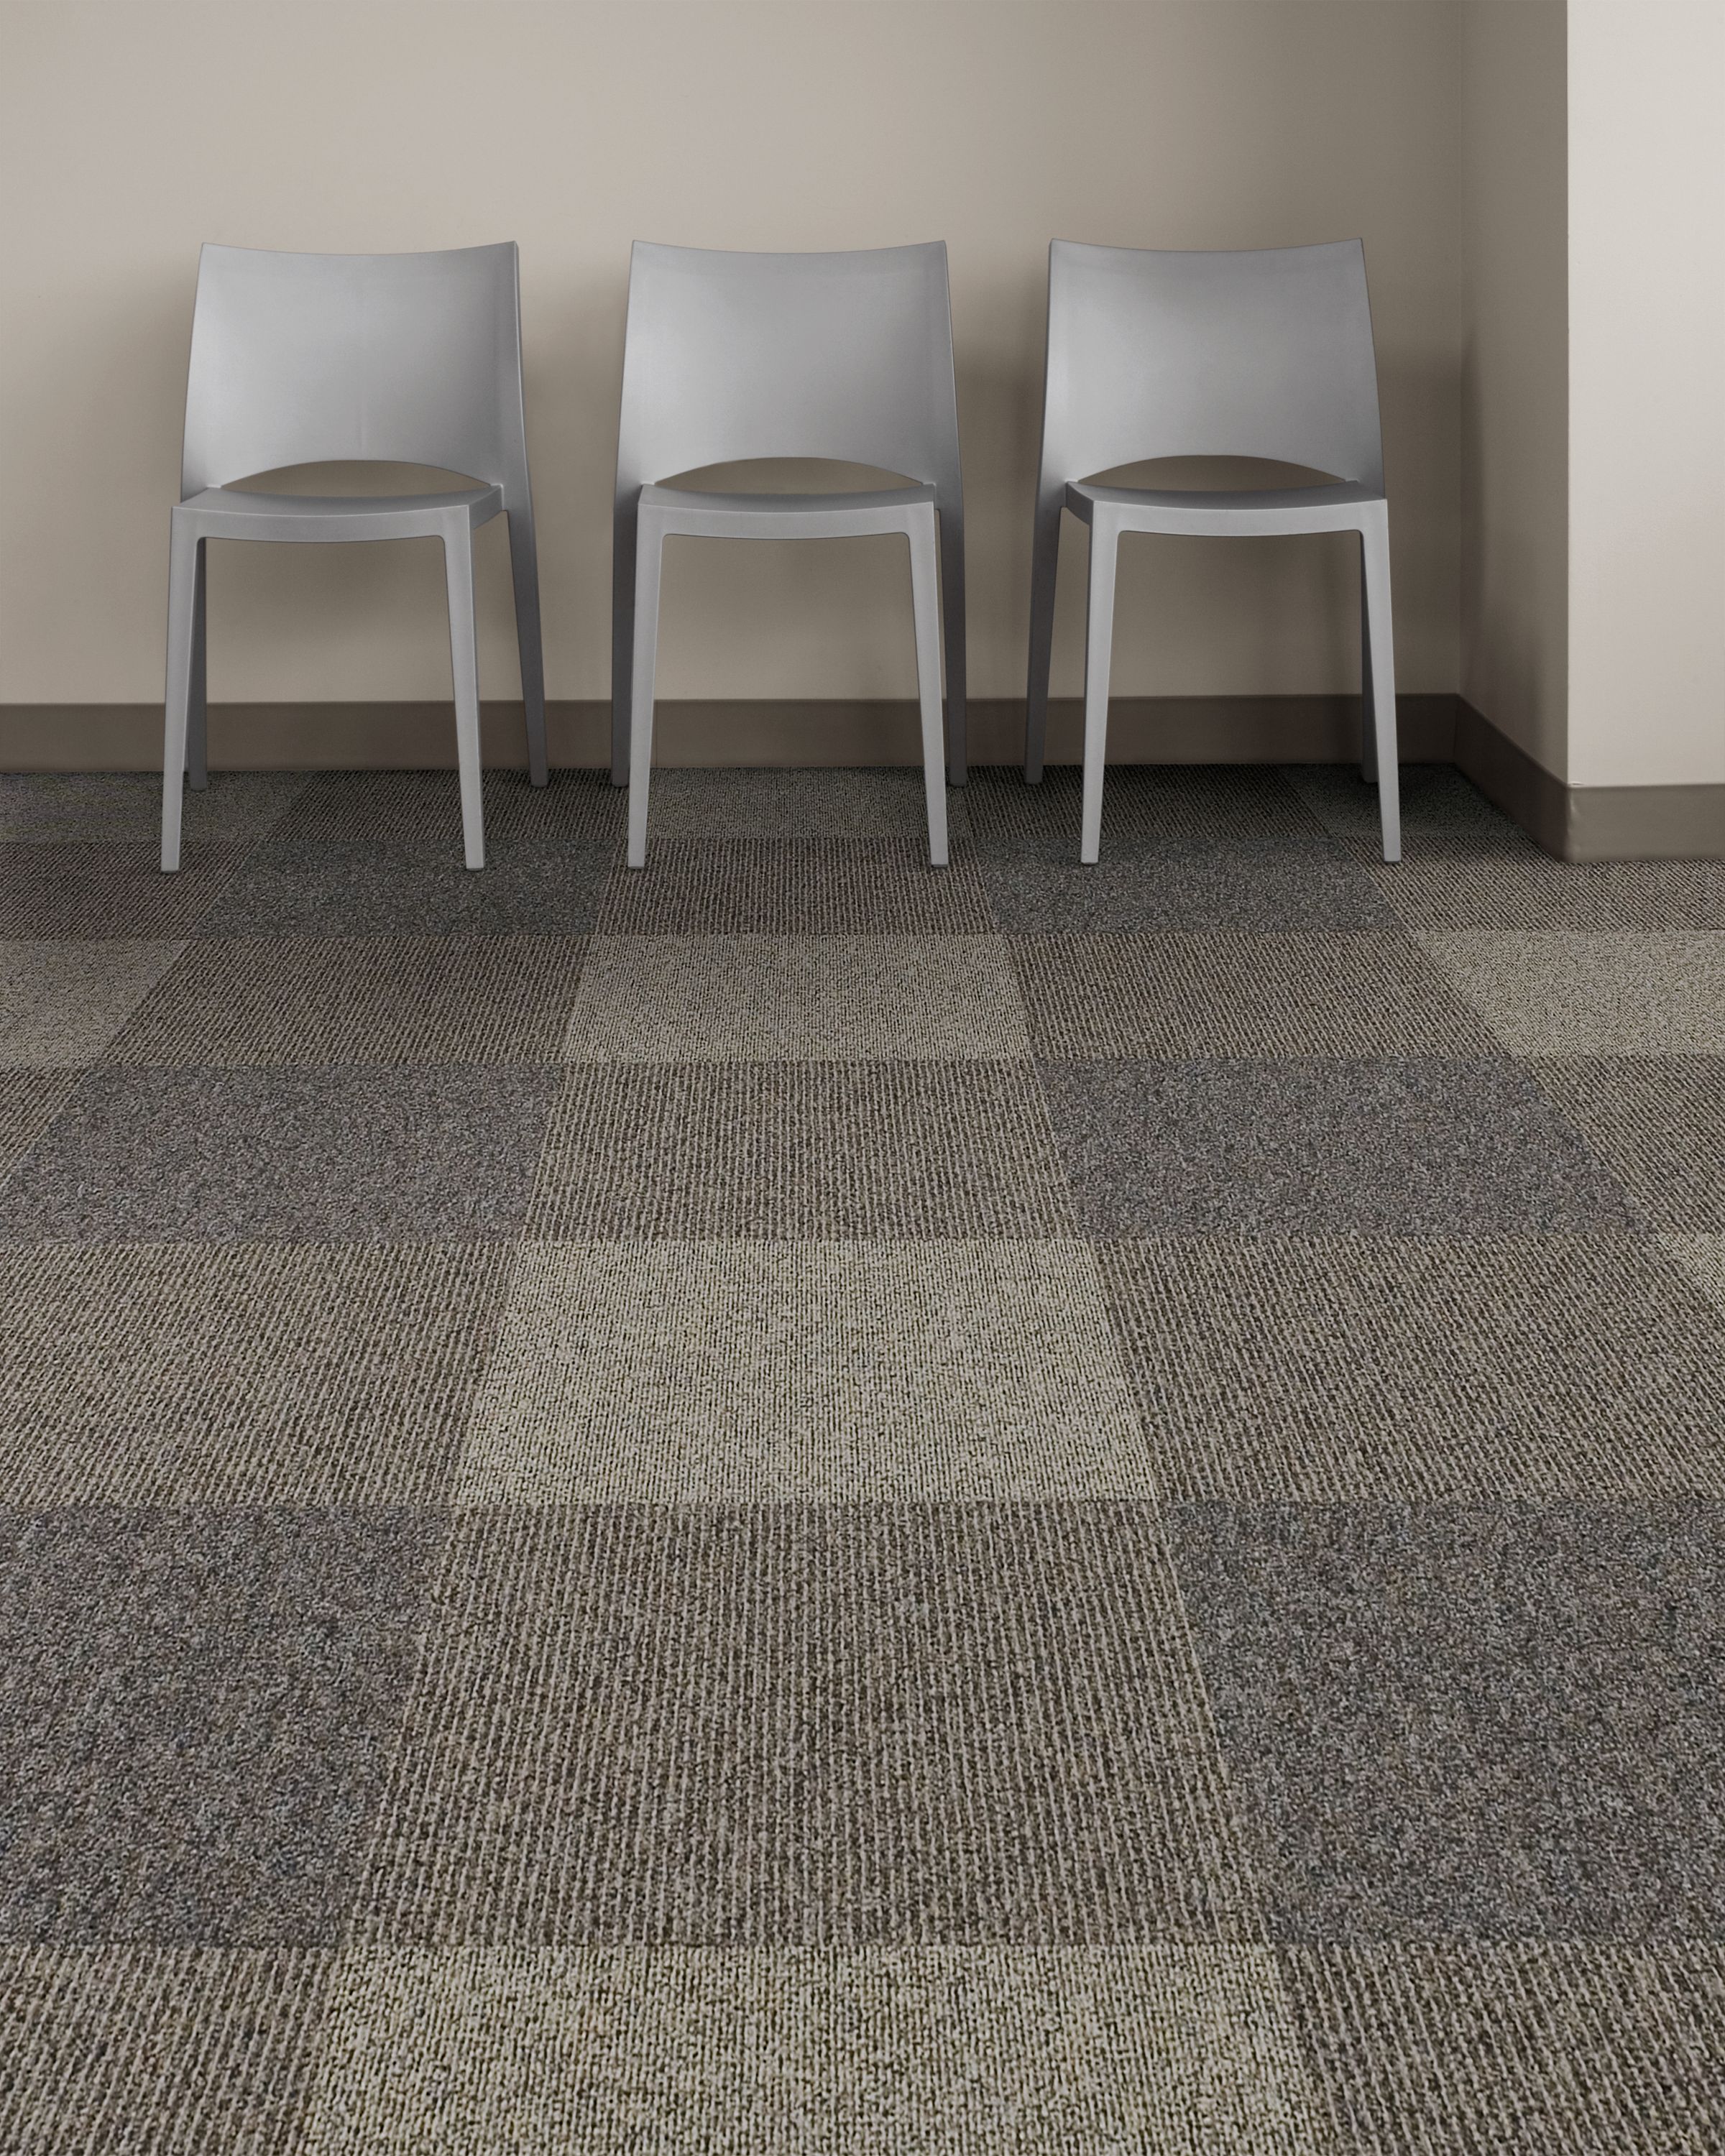 Interface Broomed, Grooved and Brushed carpet tile in room with three chairs image number 2